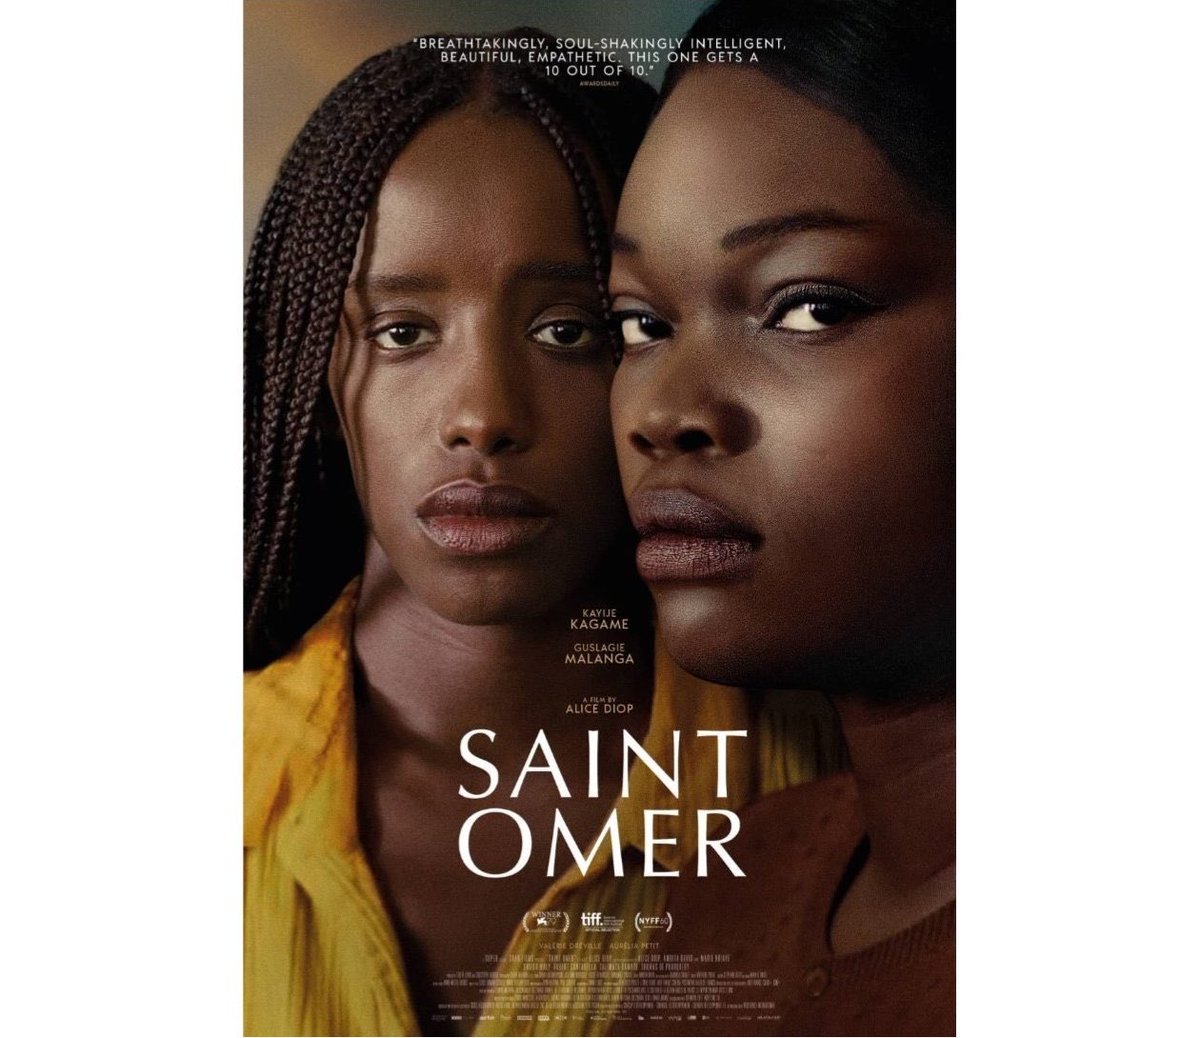 HLSI Film Soc showing of Saint Omer dir. Alice Diop starring Kayije Kagame, Guslagie Malanda Thurs 16 May 7.30. Based on a true story of the trial of a young student leaving her baby to drown. Book via our website